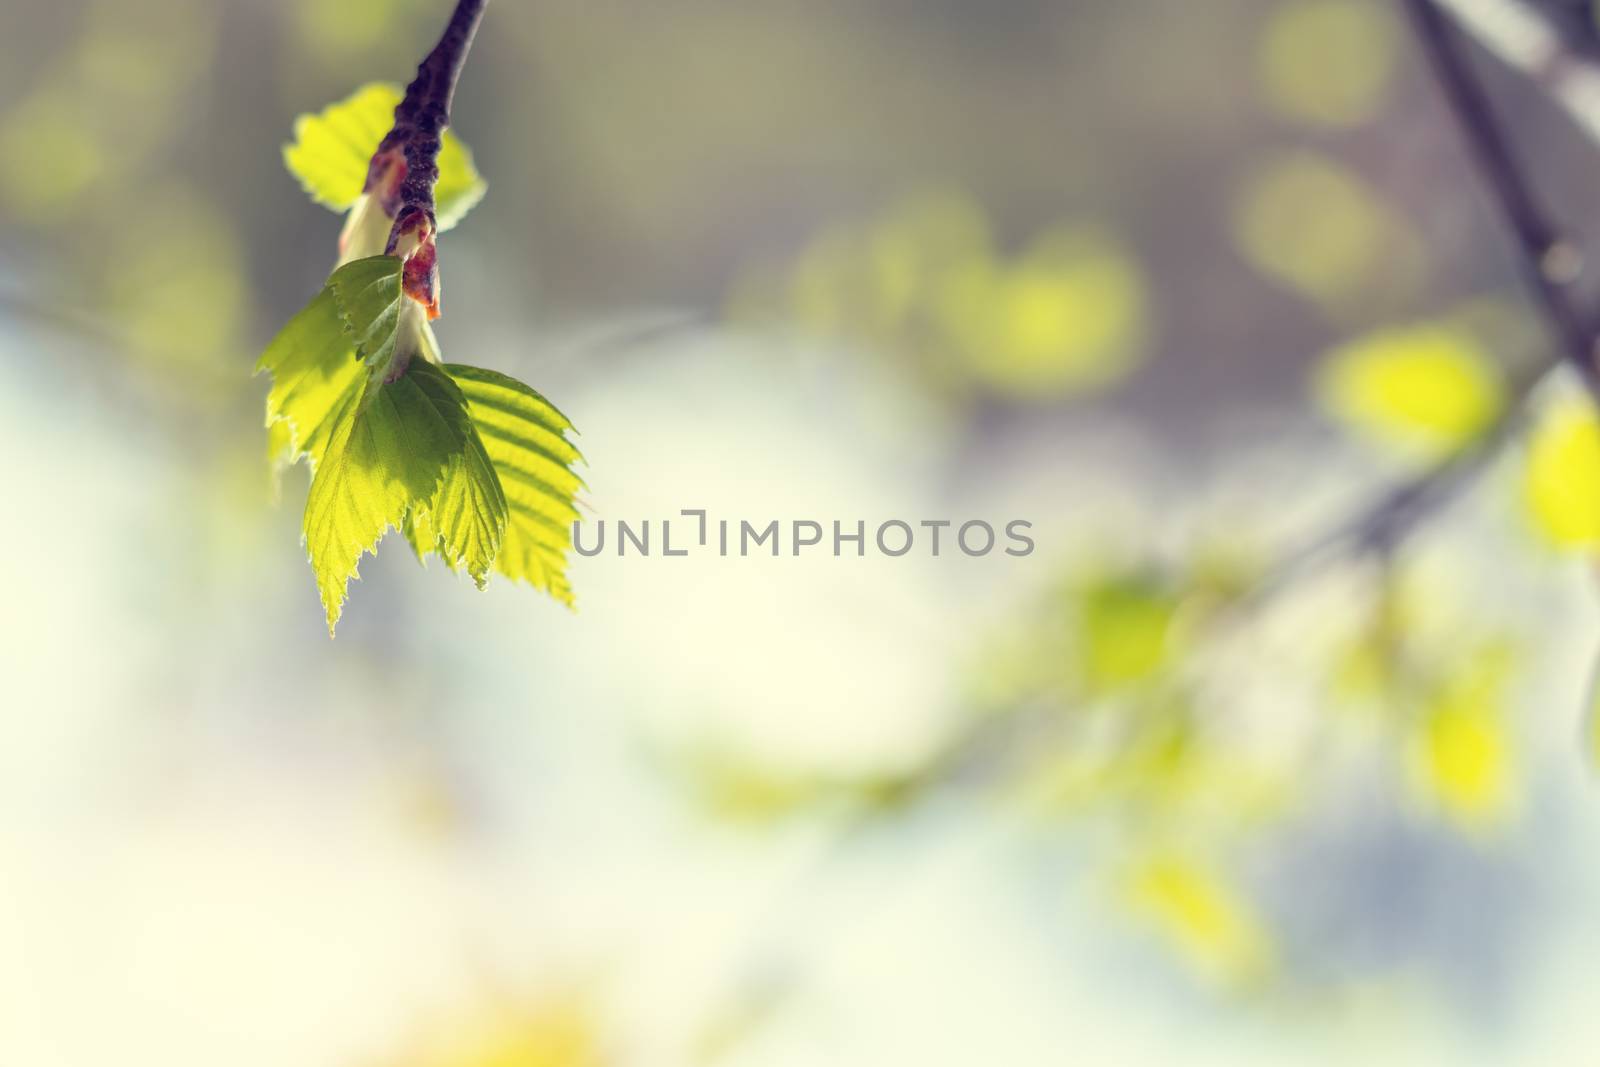 Birch twig with young foliage on blurred trees and blue sky background at springtime. Coloring and processing photo. Toned. Shallow depth of field.